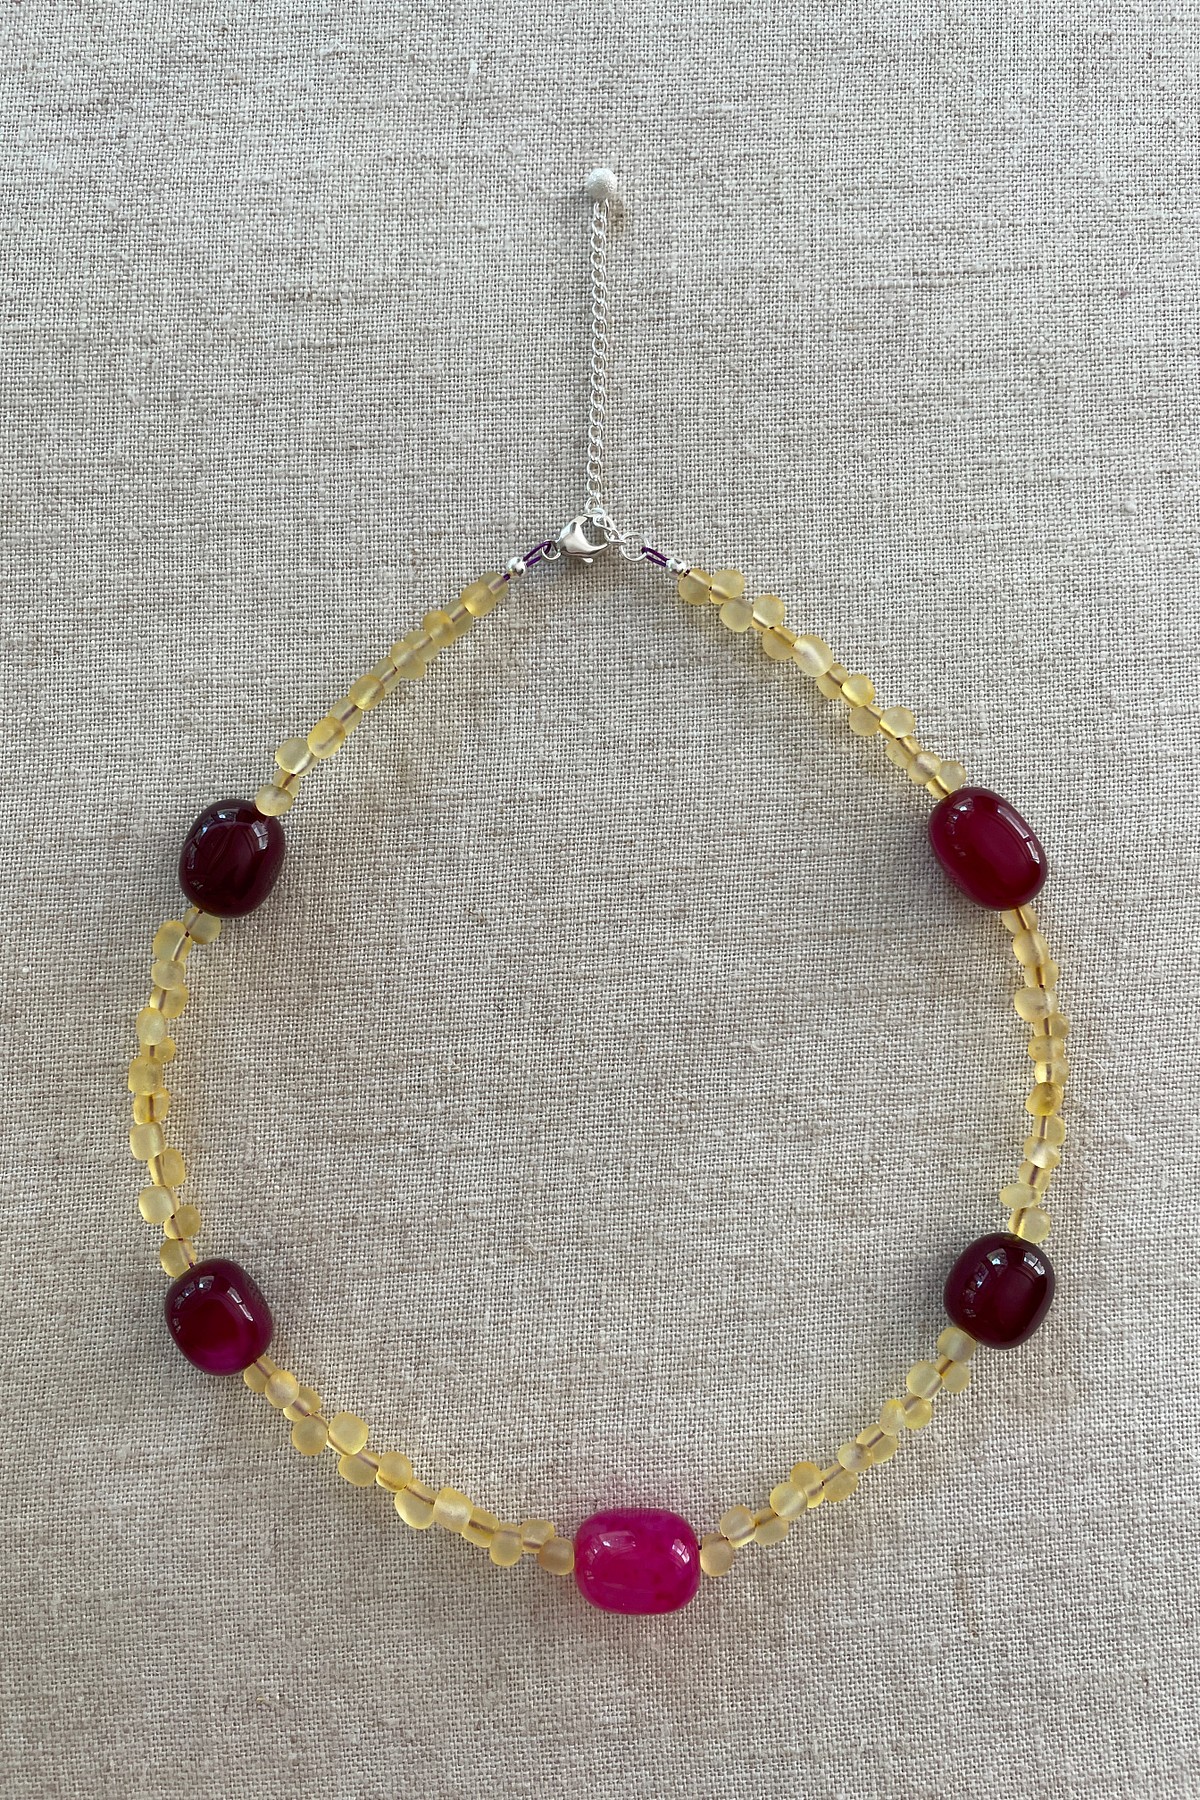 Sour Cherry Necklace with pink agate